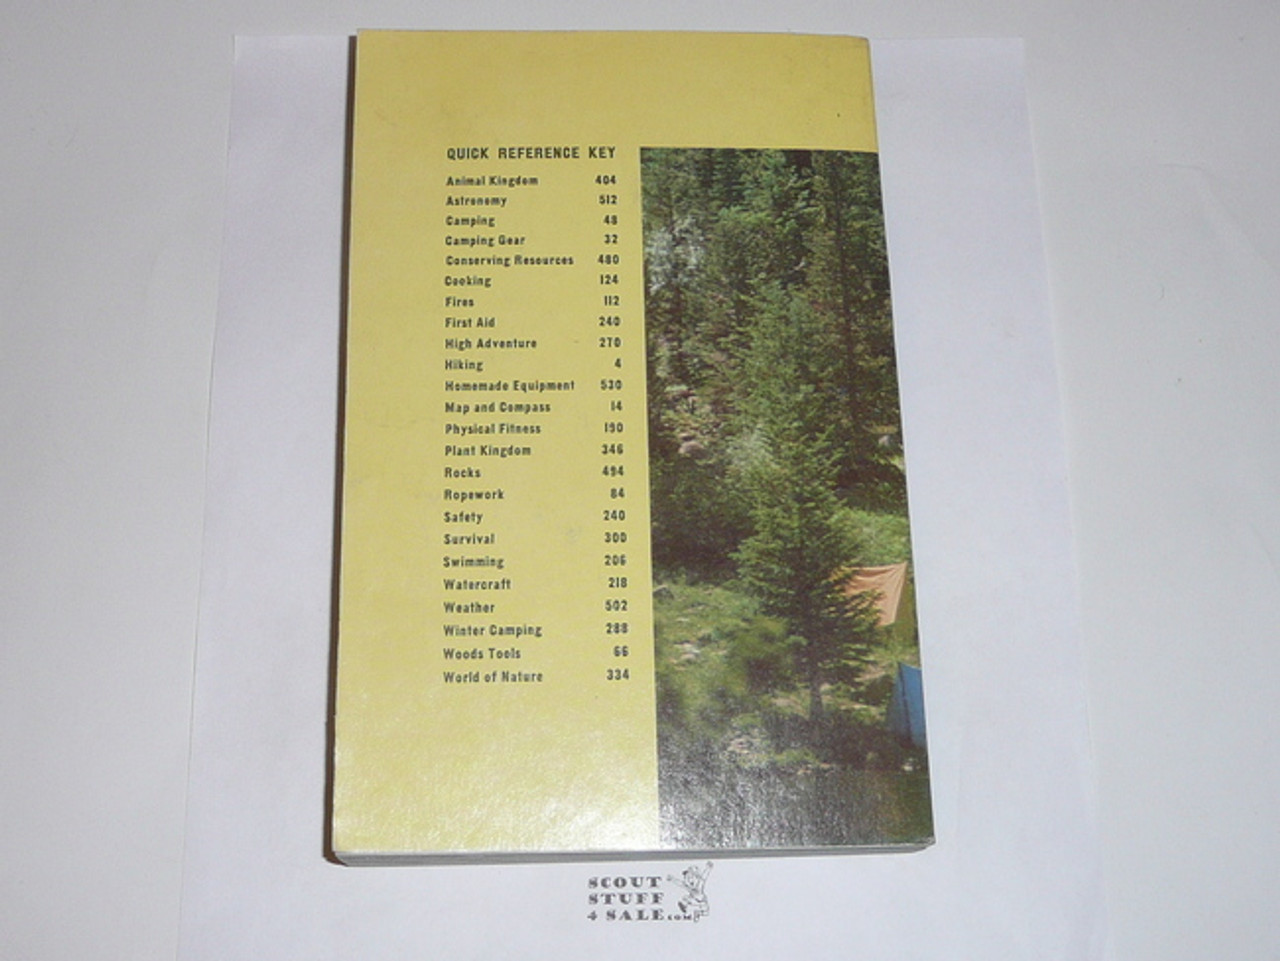 1977 Boy Scout Field Book, Second Edition, December 1977 Printing, MINT condition